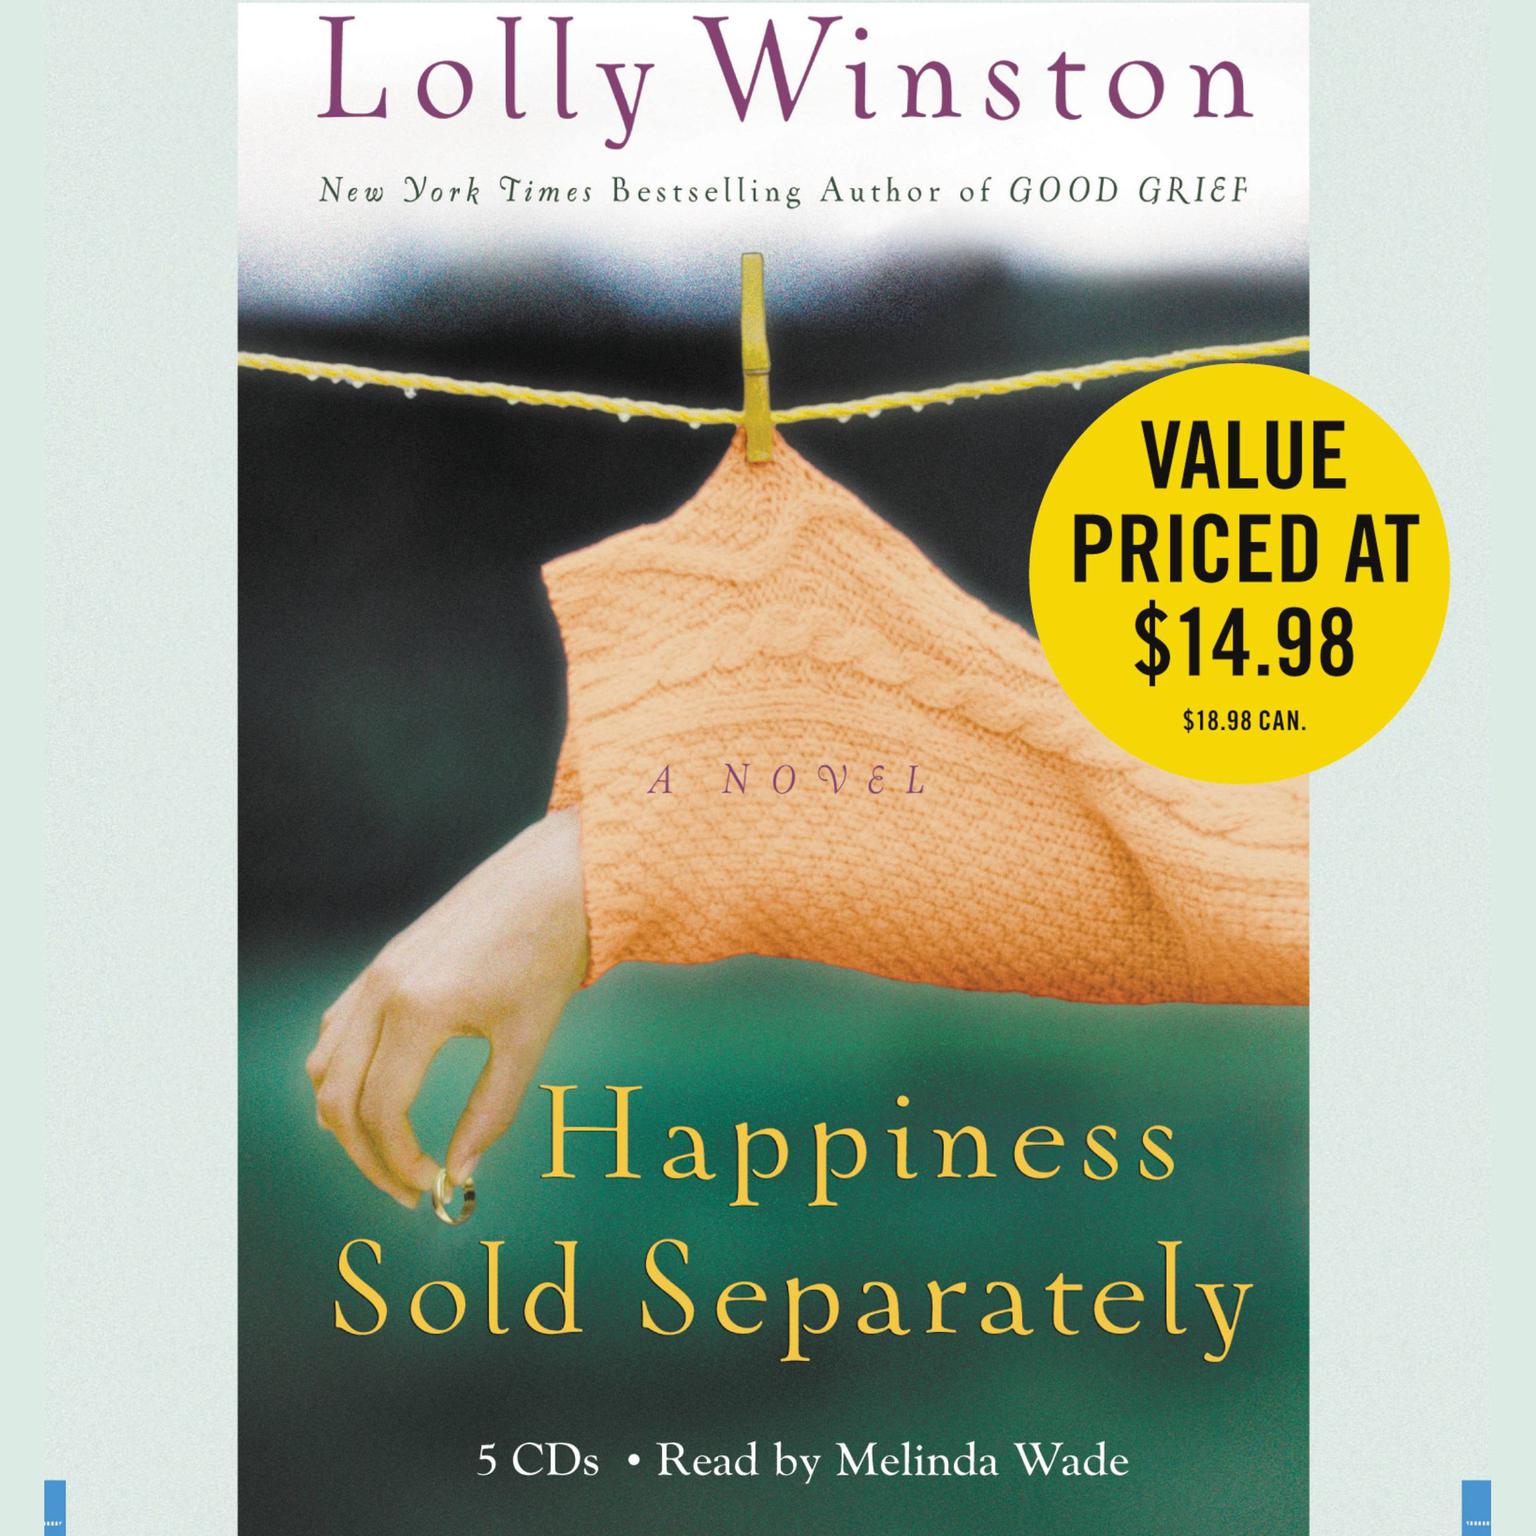 Happiness Sold Separately (Abridged) Audiobook, by Lolly Winston